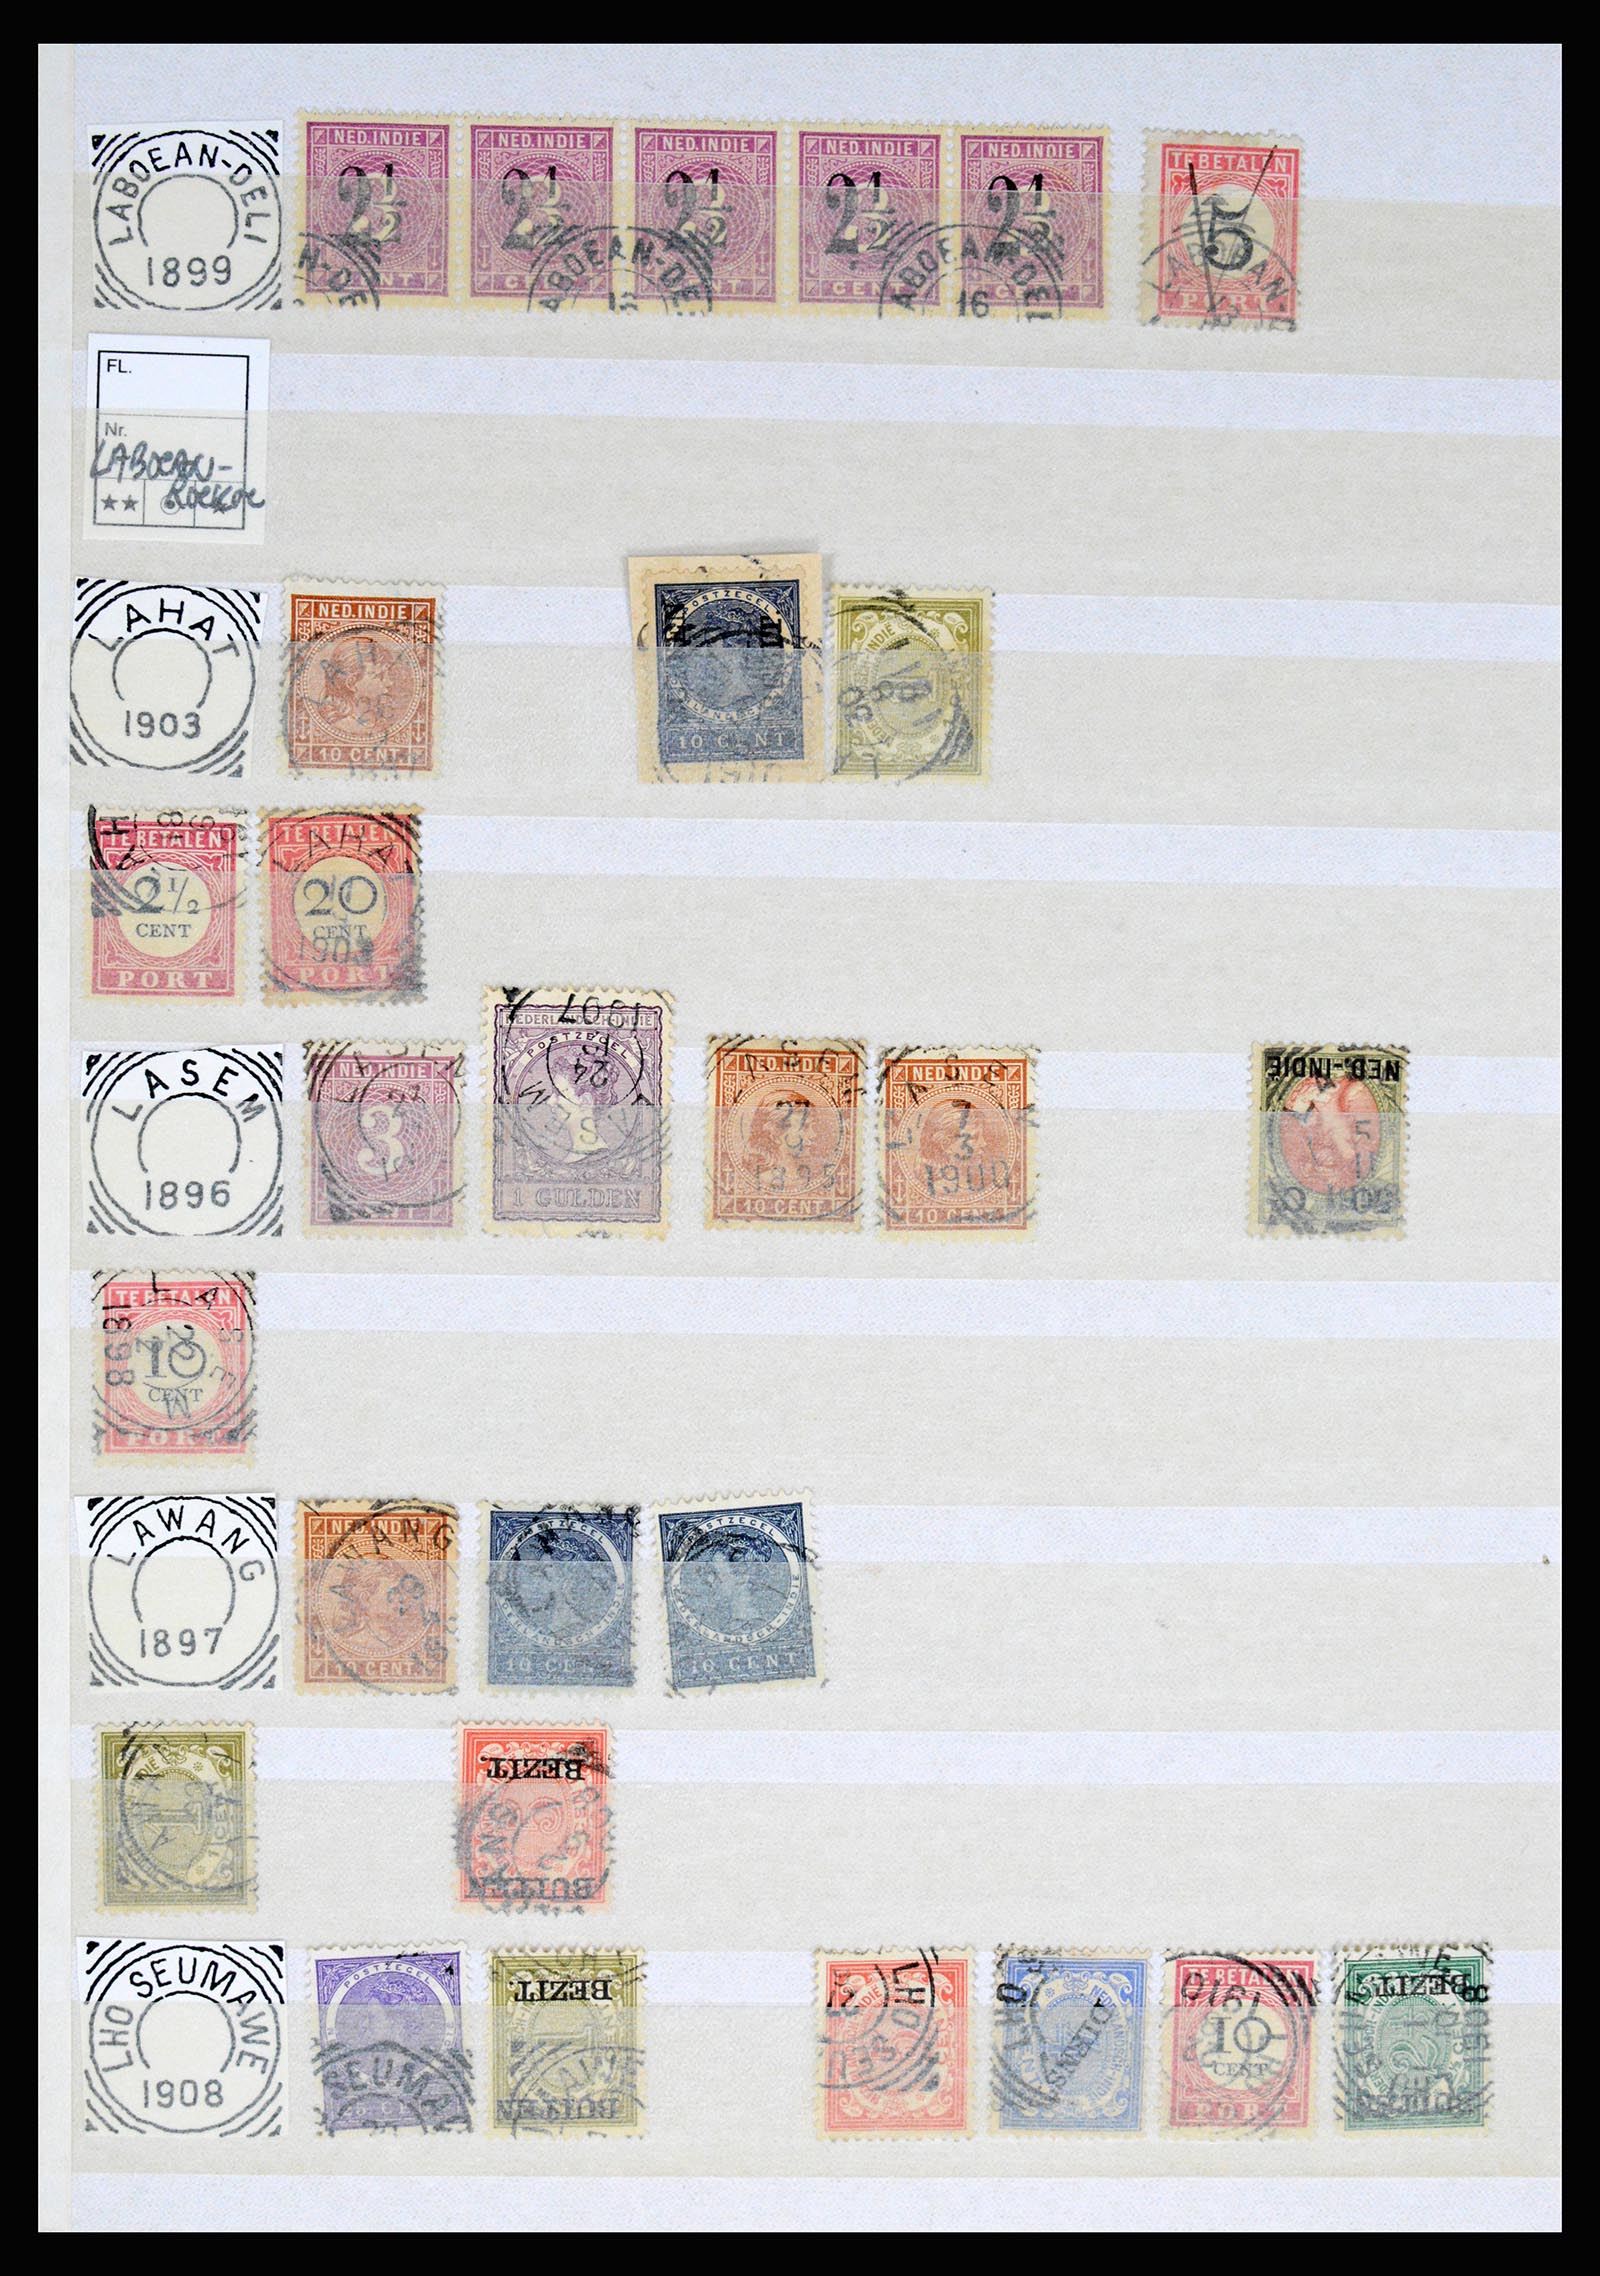 36839 075 - Stamp collection 36839 Dutch east Indies square cancels.